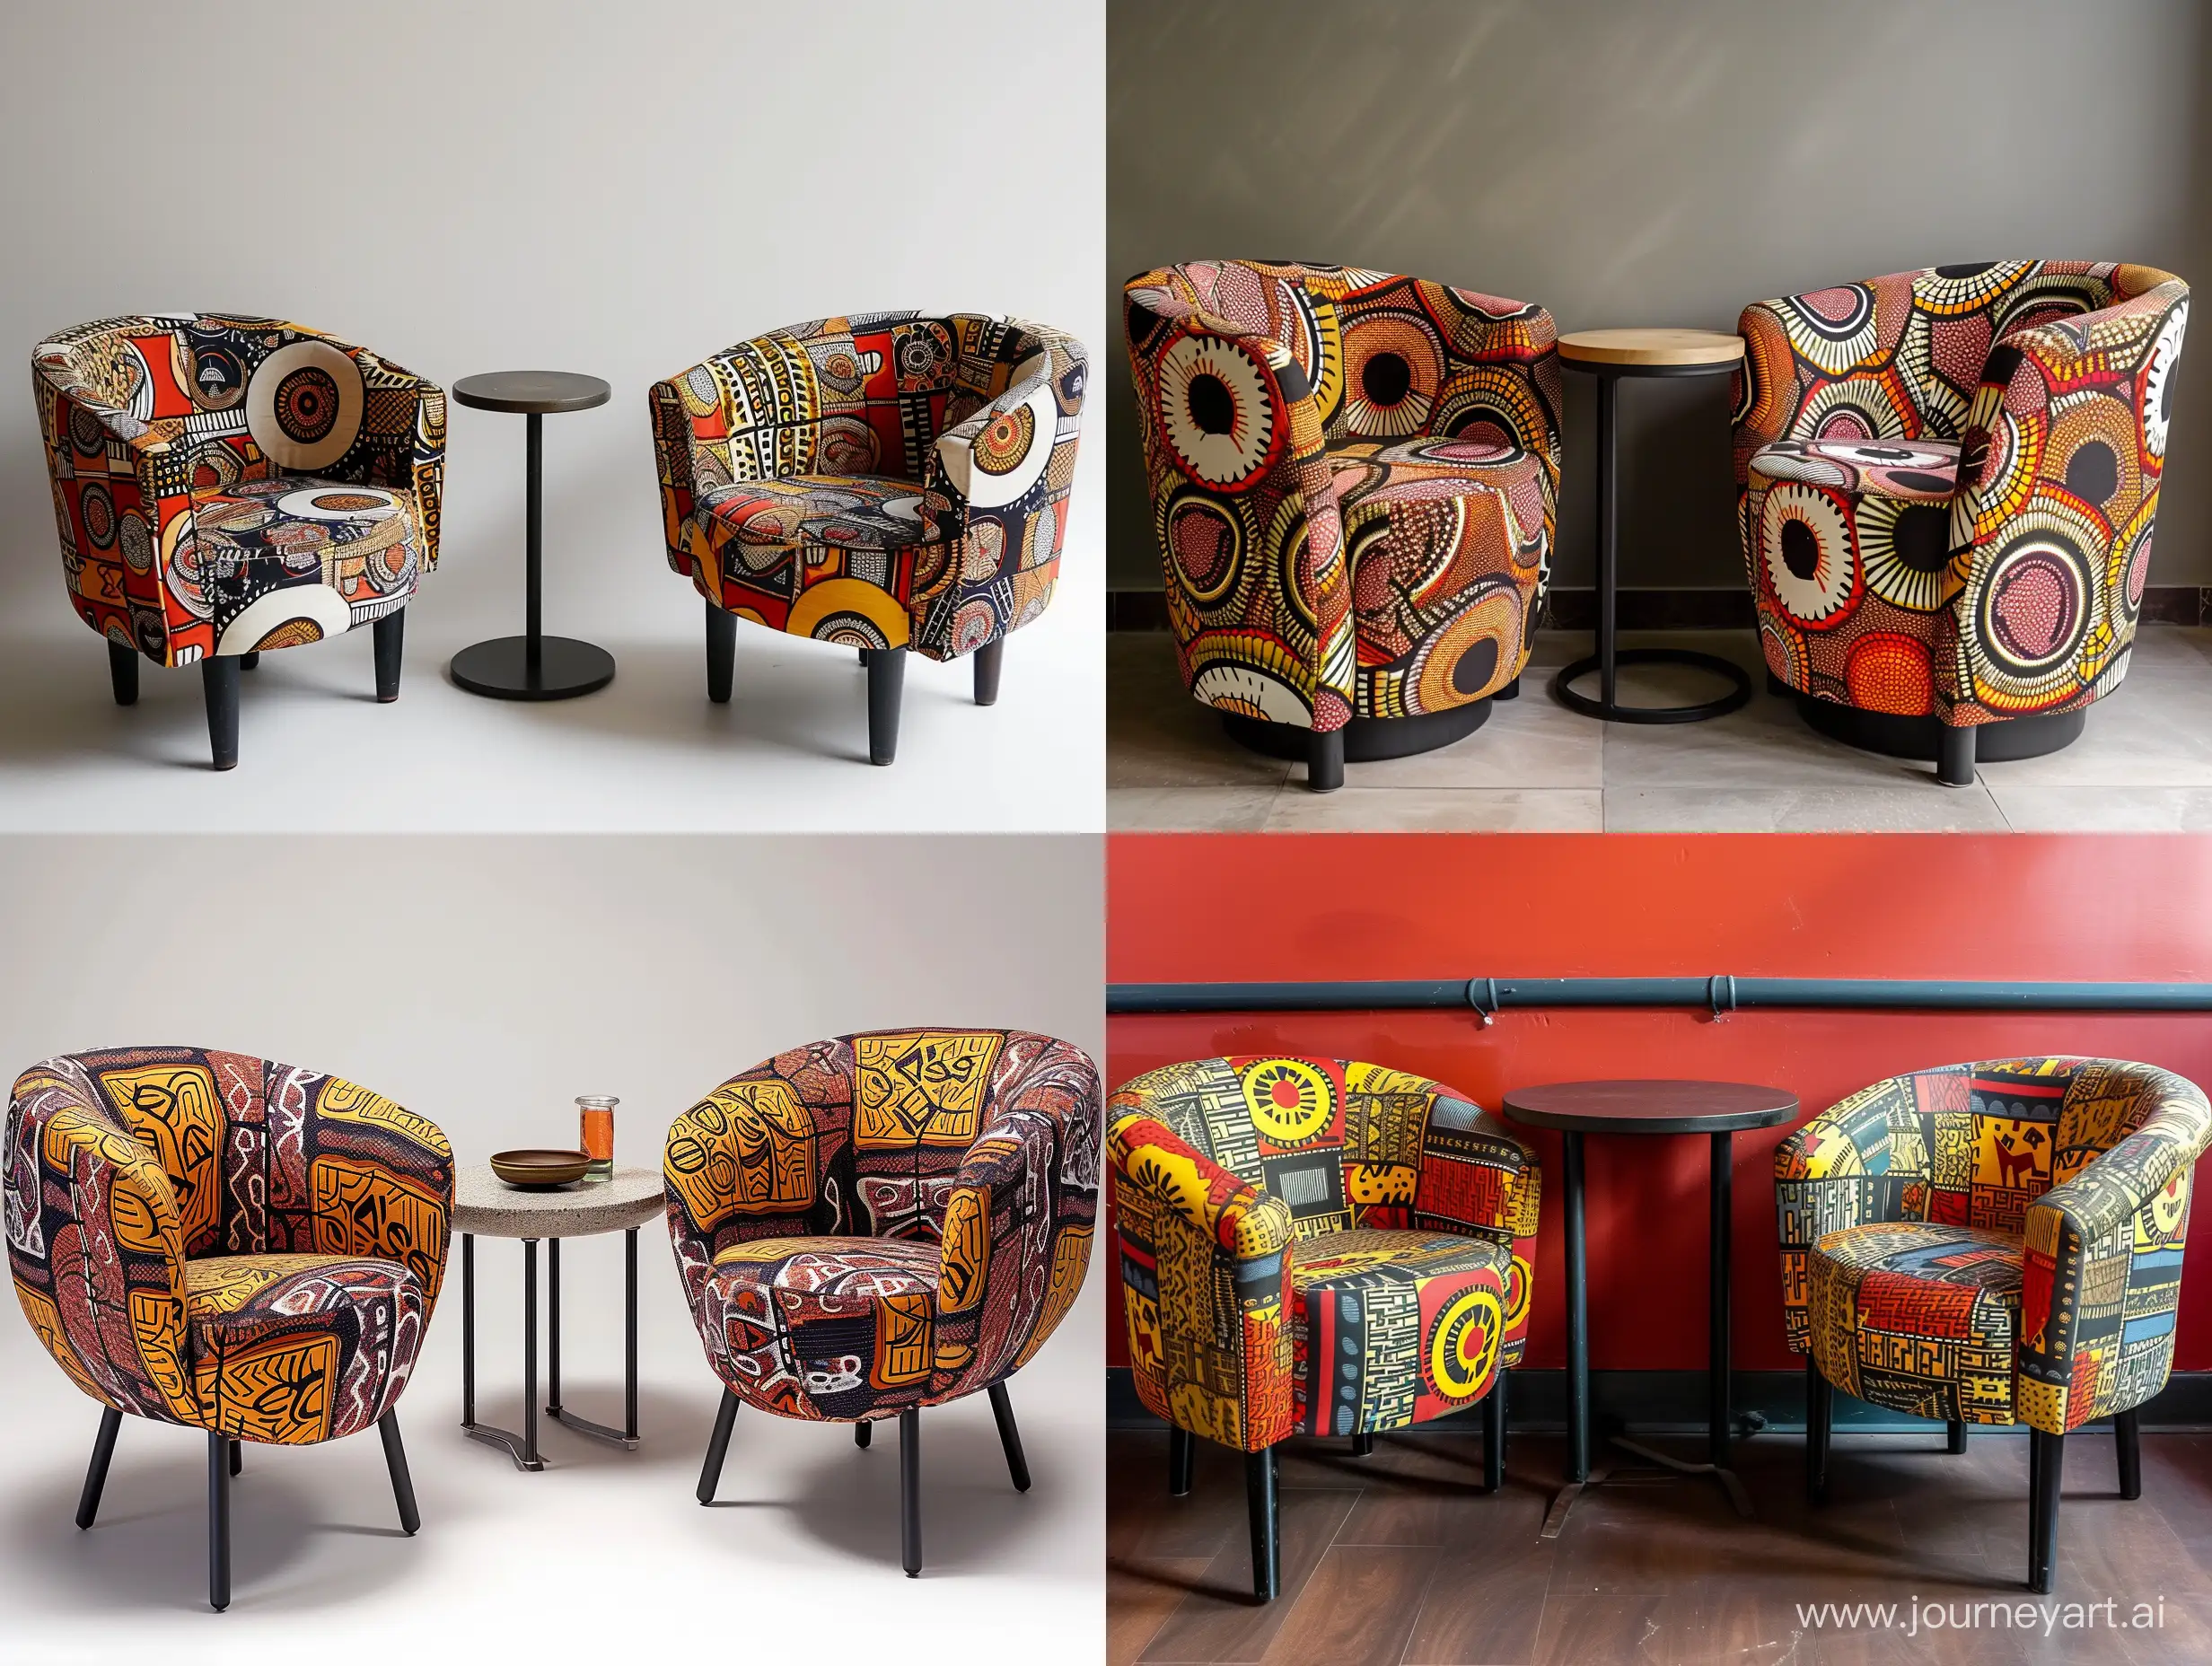 Futuristic-African-Patterned-Chairs-and-Table-Ensemble-with-PopCulture-Flair